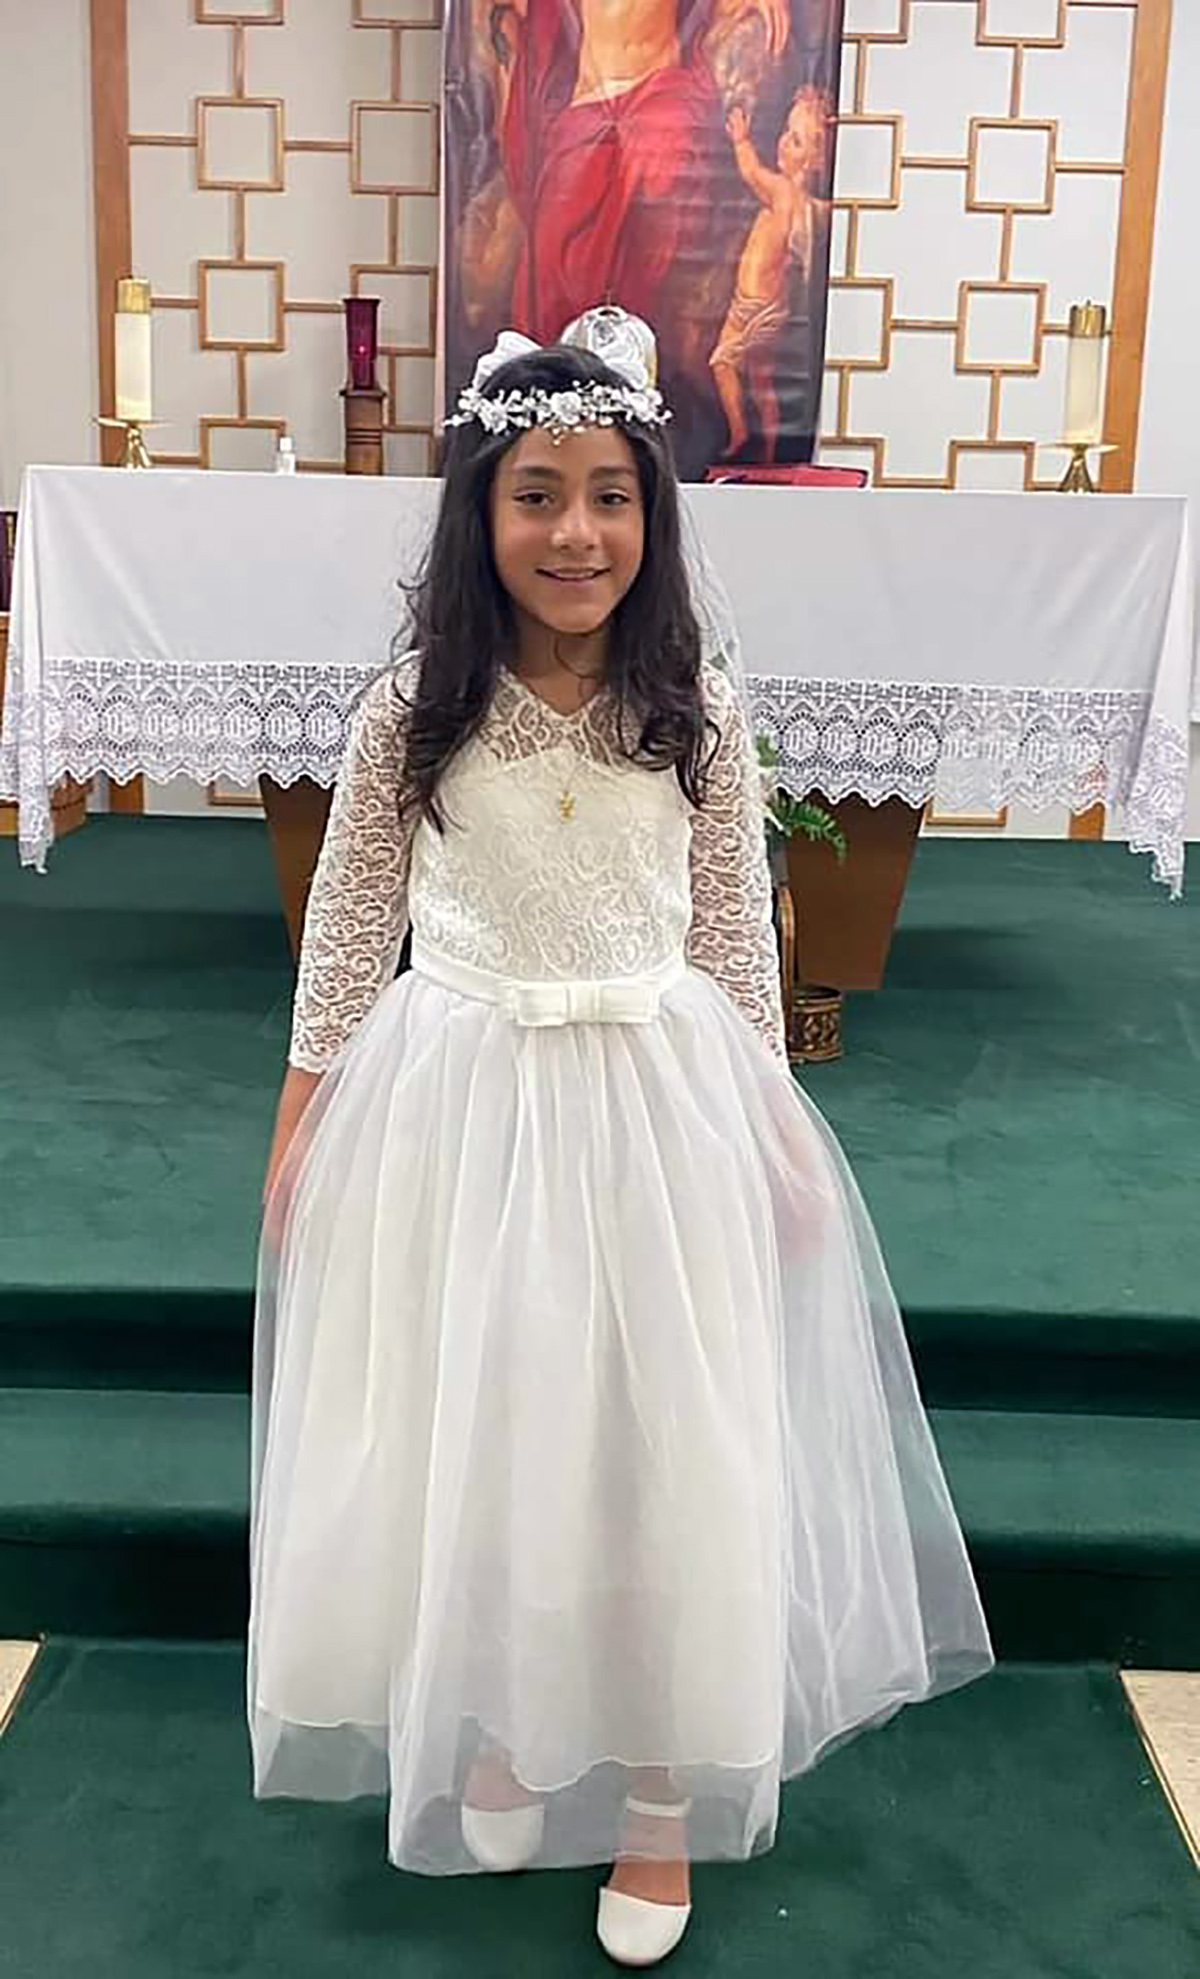 PHOTO: Fourth-grader Jacklyn Jaylen Cazares, 9, in an undated family photo. Cazares was killed in the shooting at Robb Elementary School on May 24, 2022, in Uvalde, Texas.